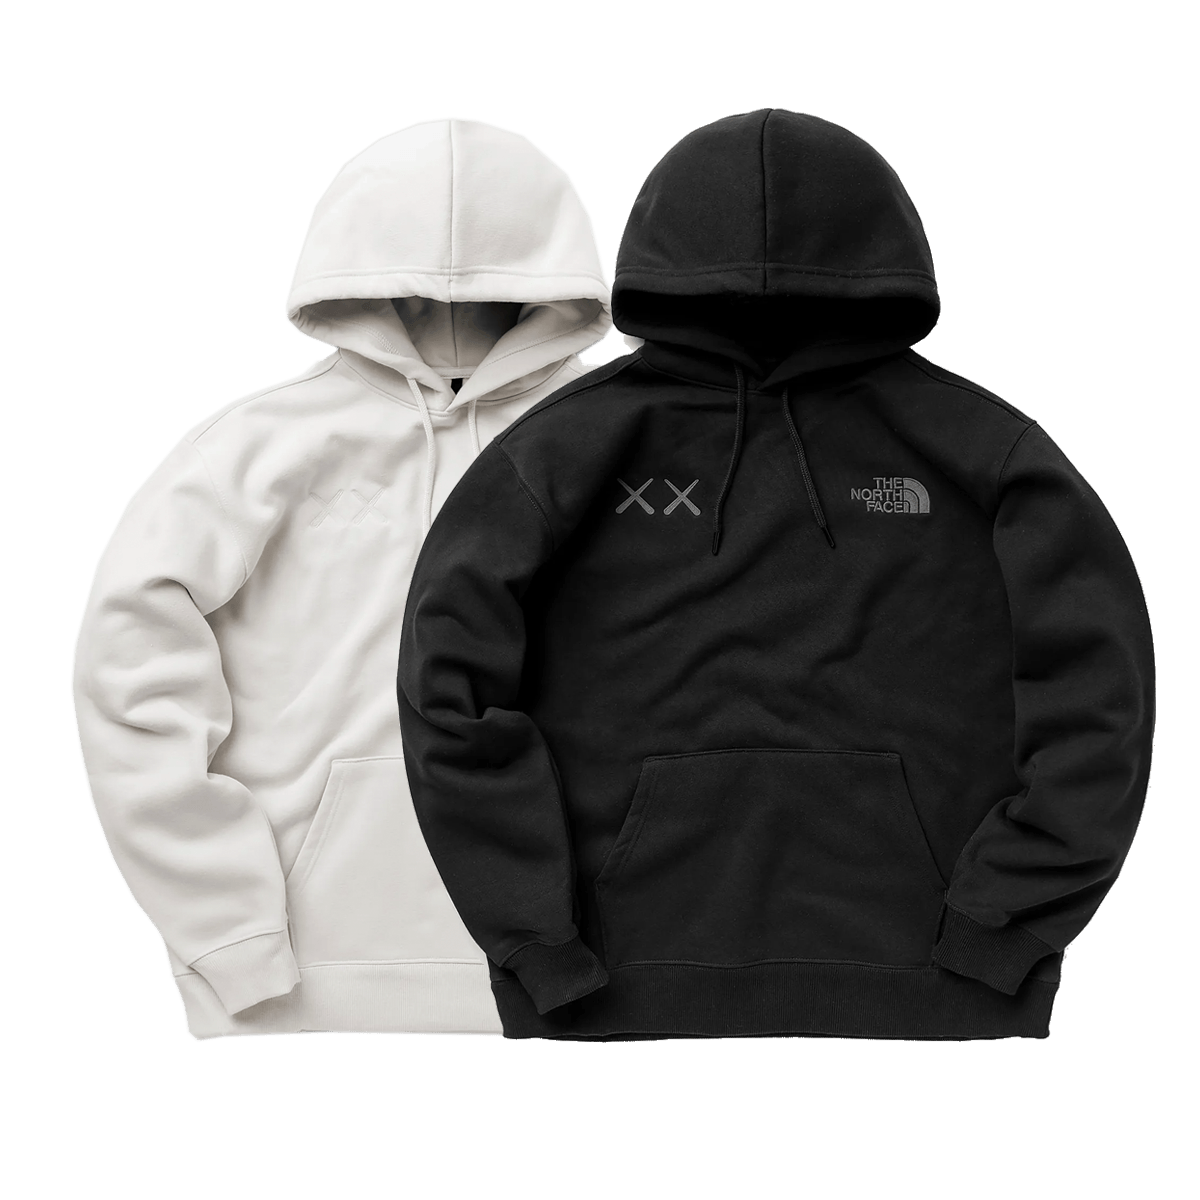 Kaws x The North Face Project X Hoodie NF0A7WLIJK31